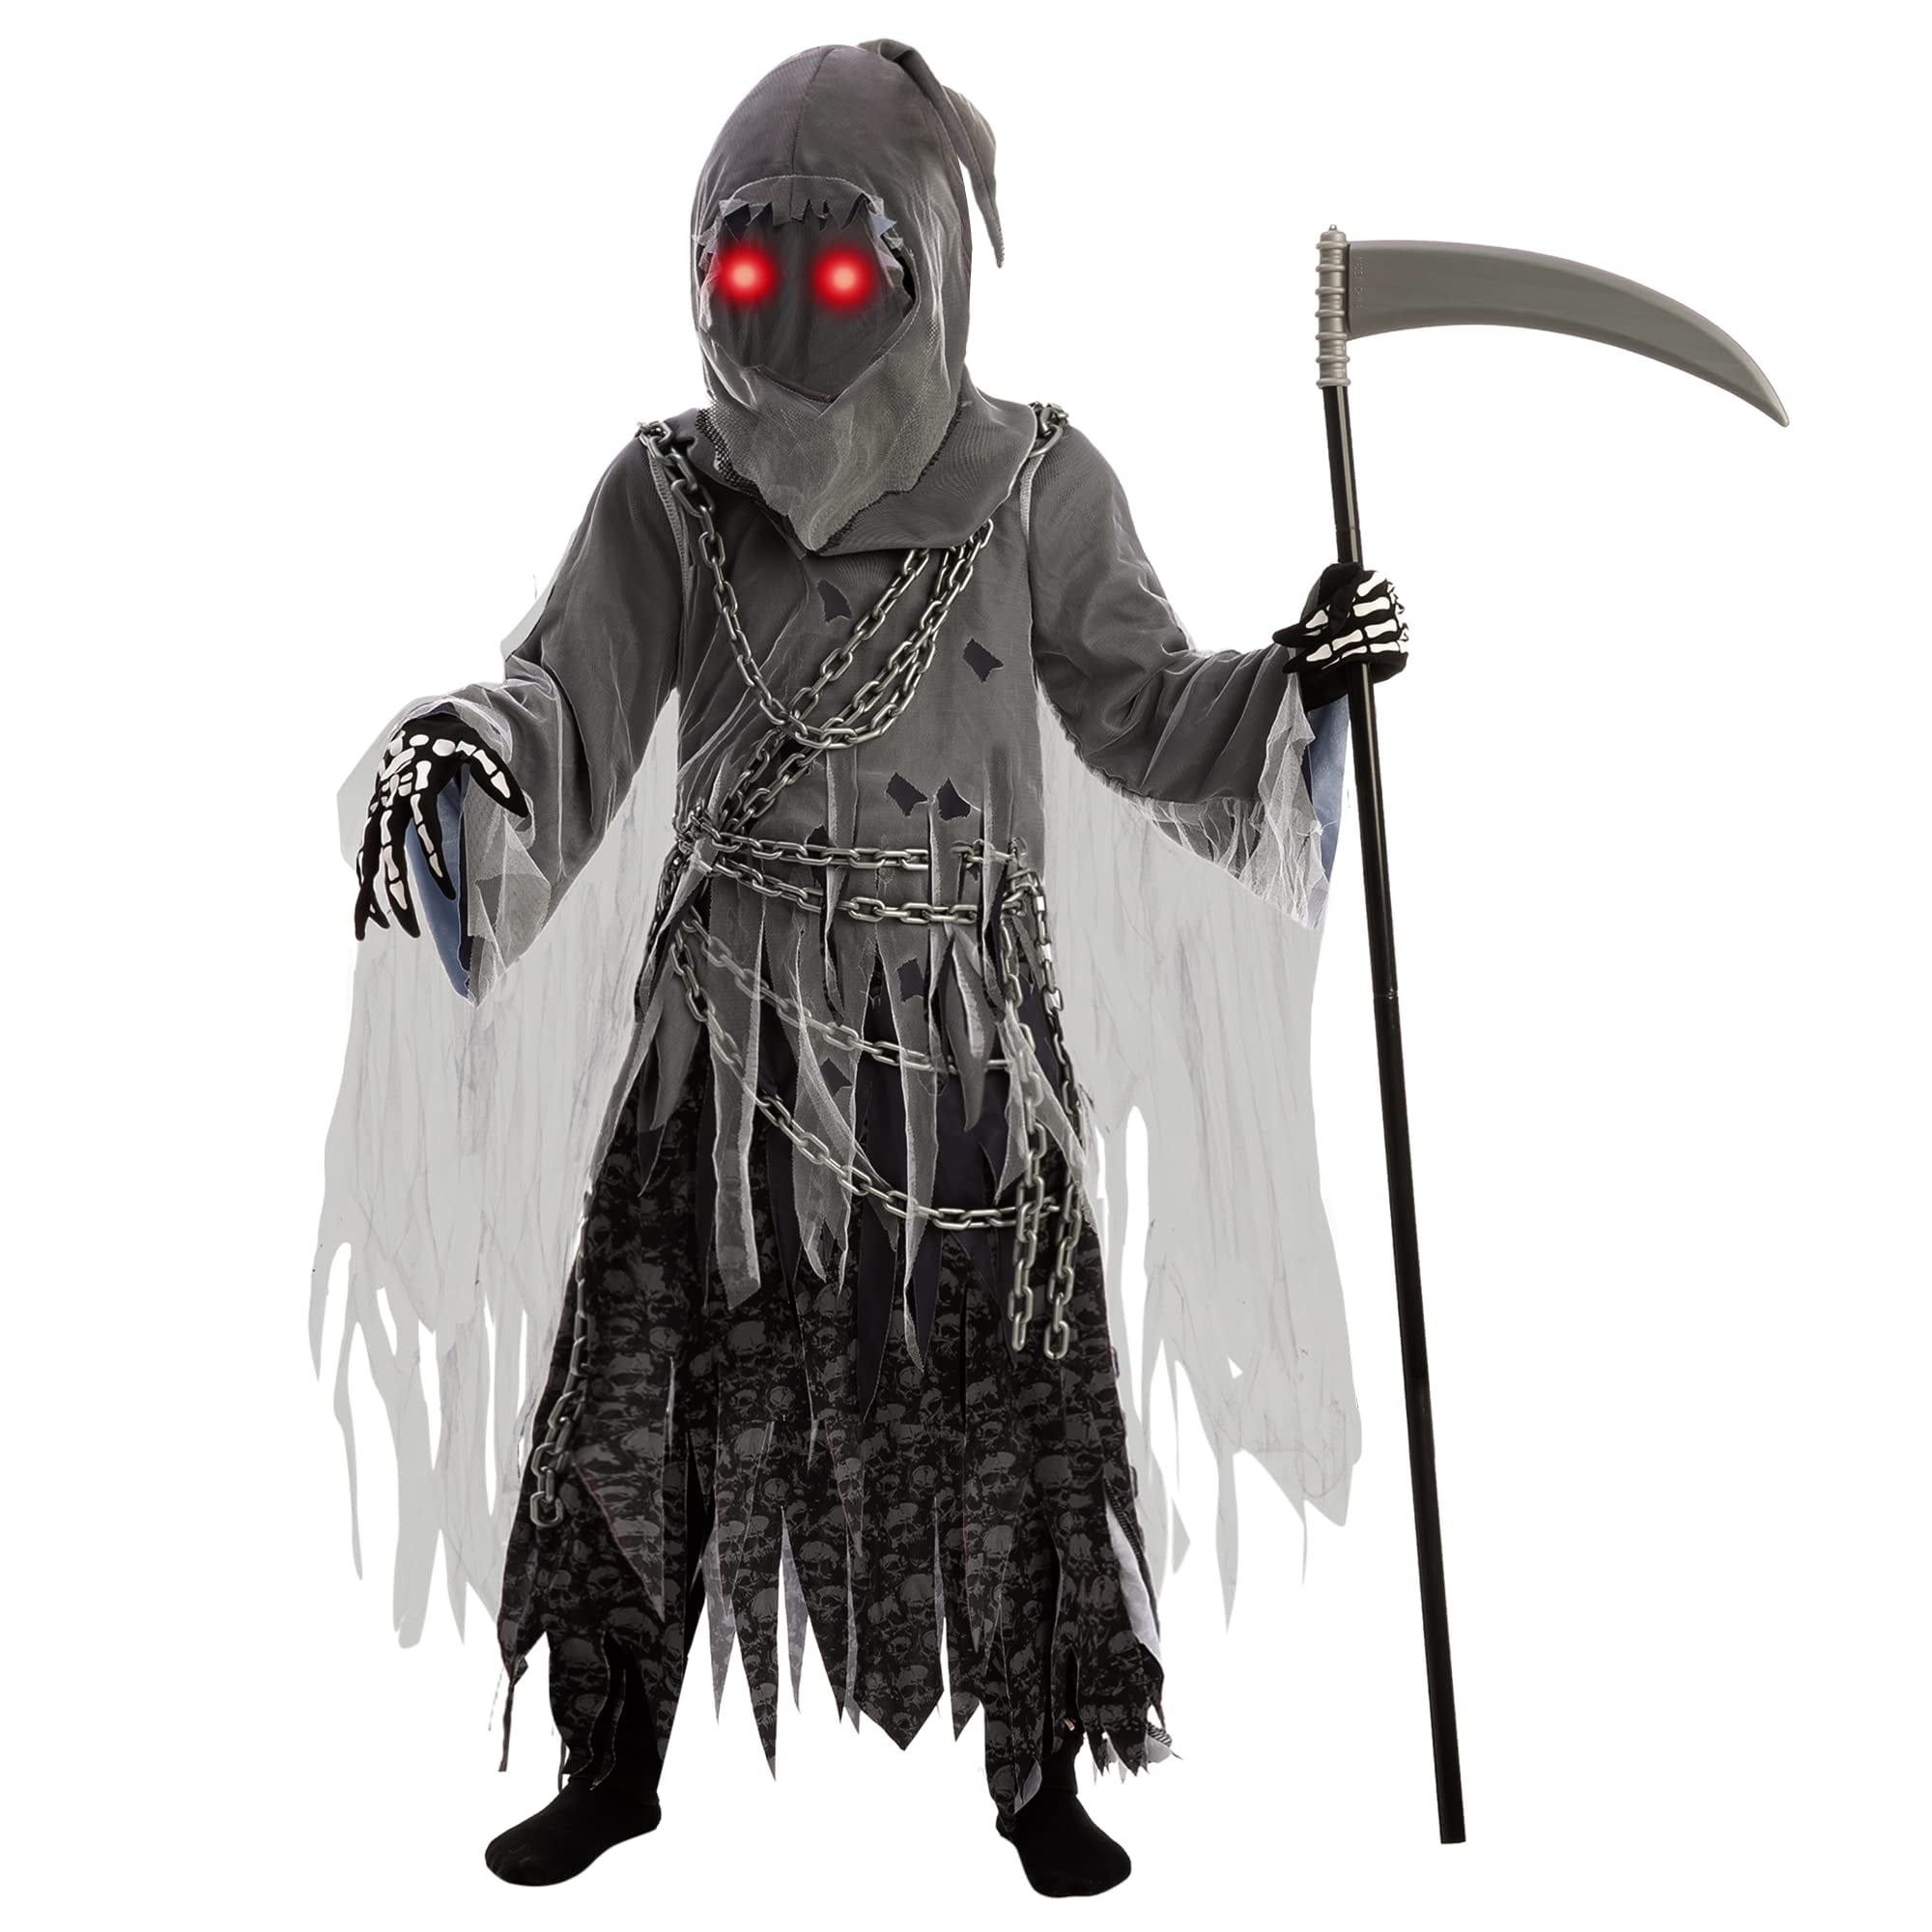 Spooktacular Creations Child Unisex Grim Reaper Costume, Halloween Costume  with Glowing Red Eyes for Kids Trick-or-Treating,S